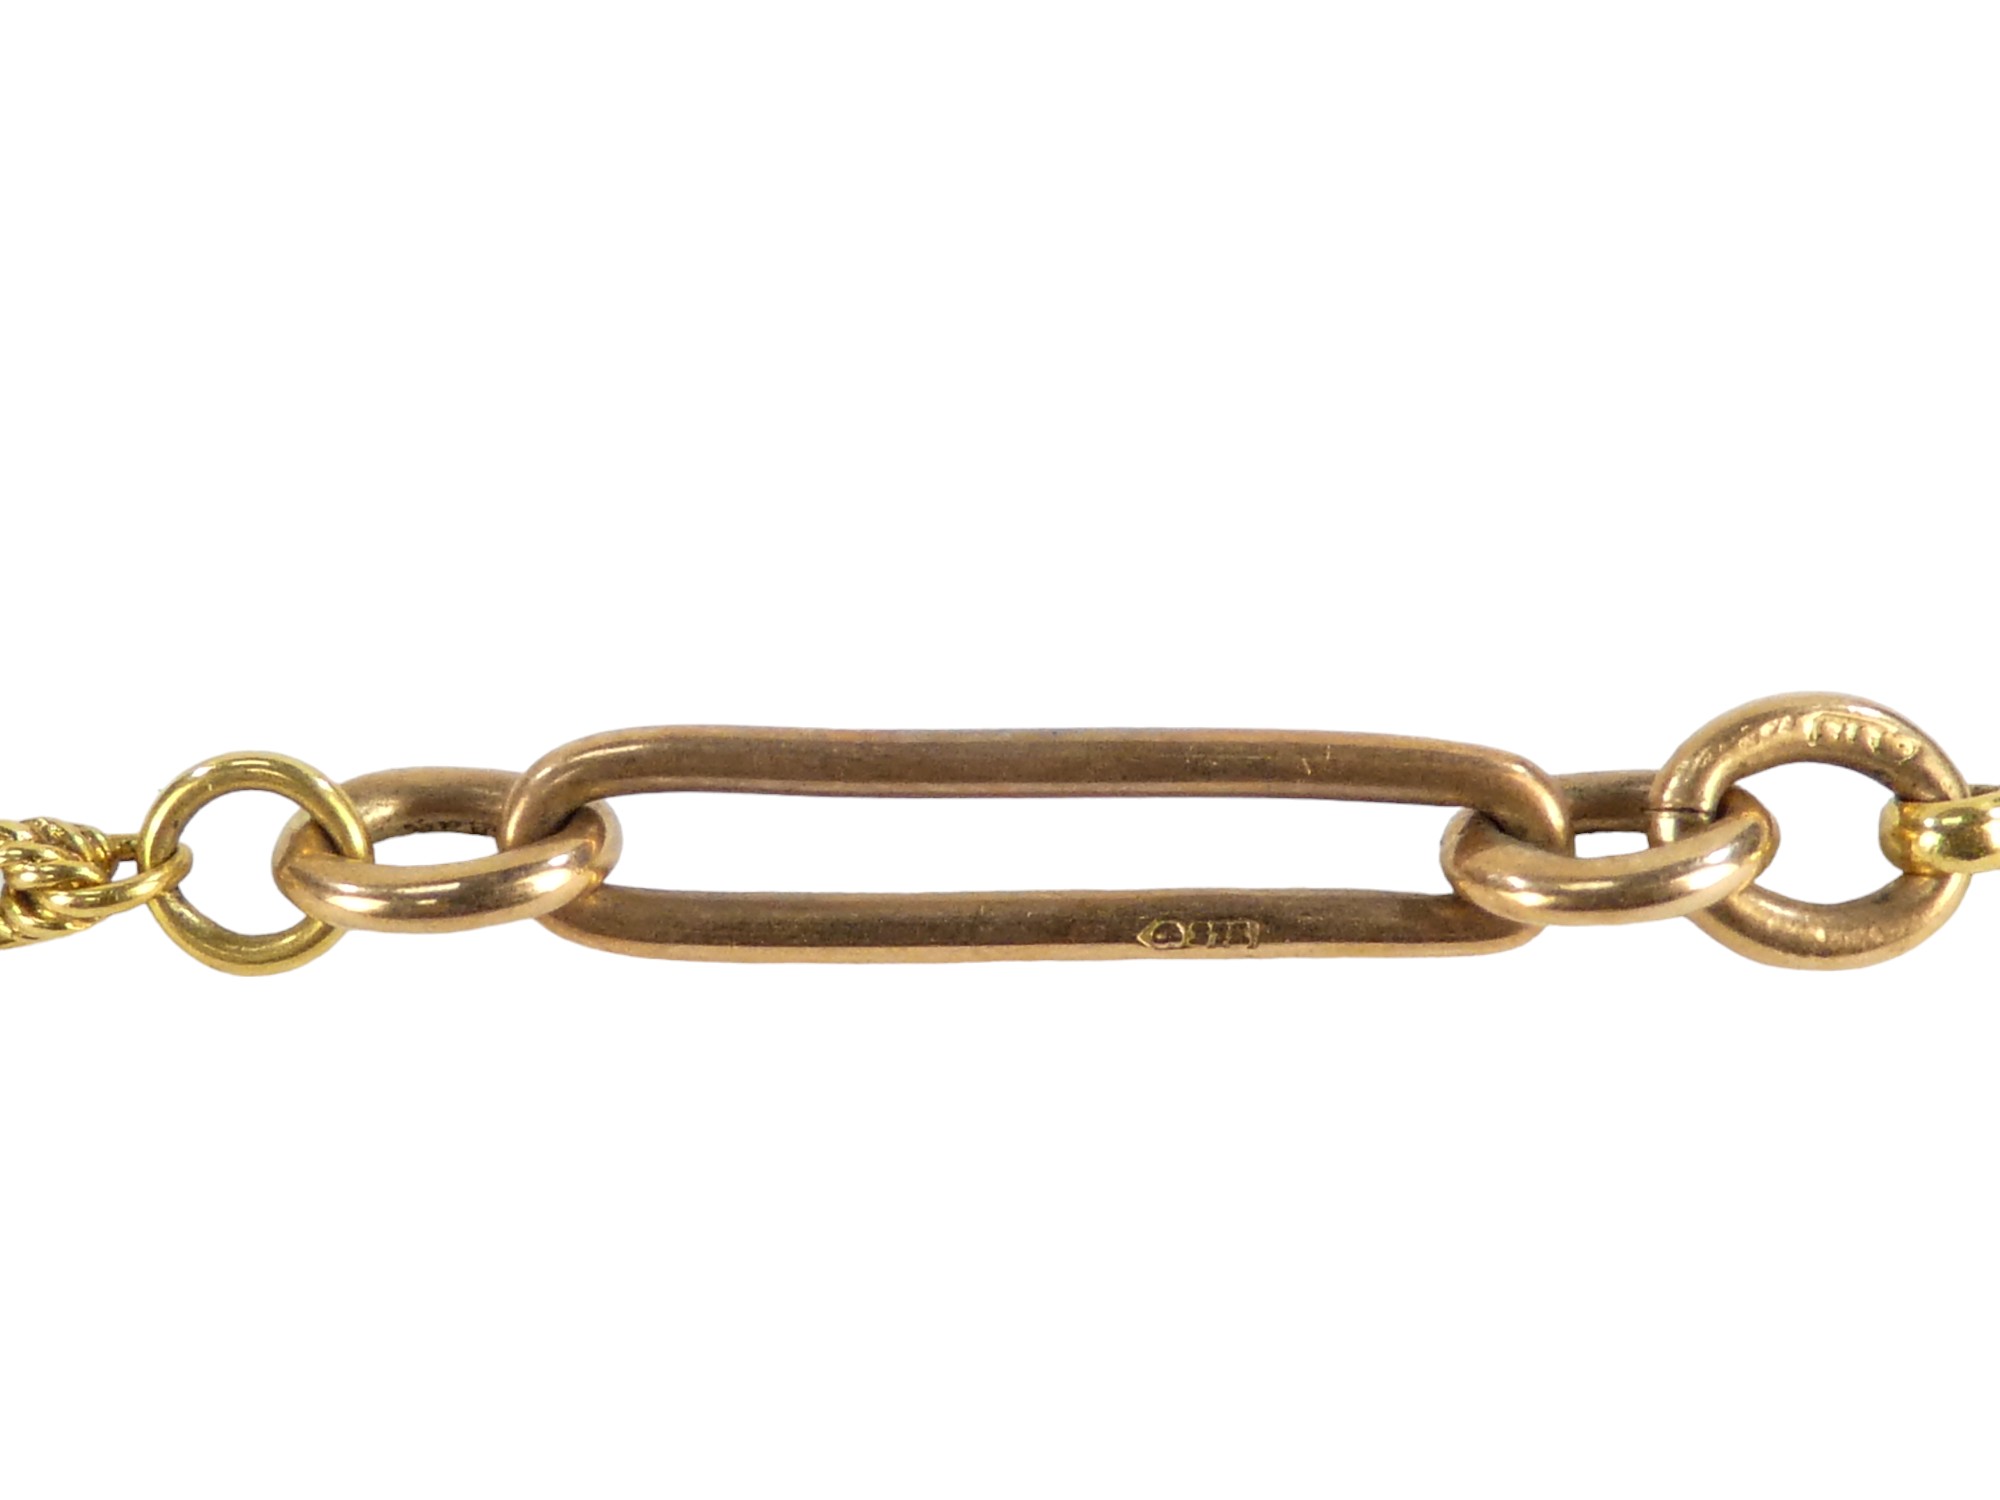 A 9ct gold swizzle stick - engine turned, on a gilt metal chain with 18ct gold clasps, weight 18g. - Image 5 of 5